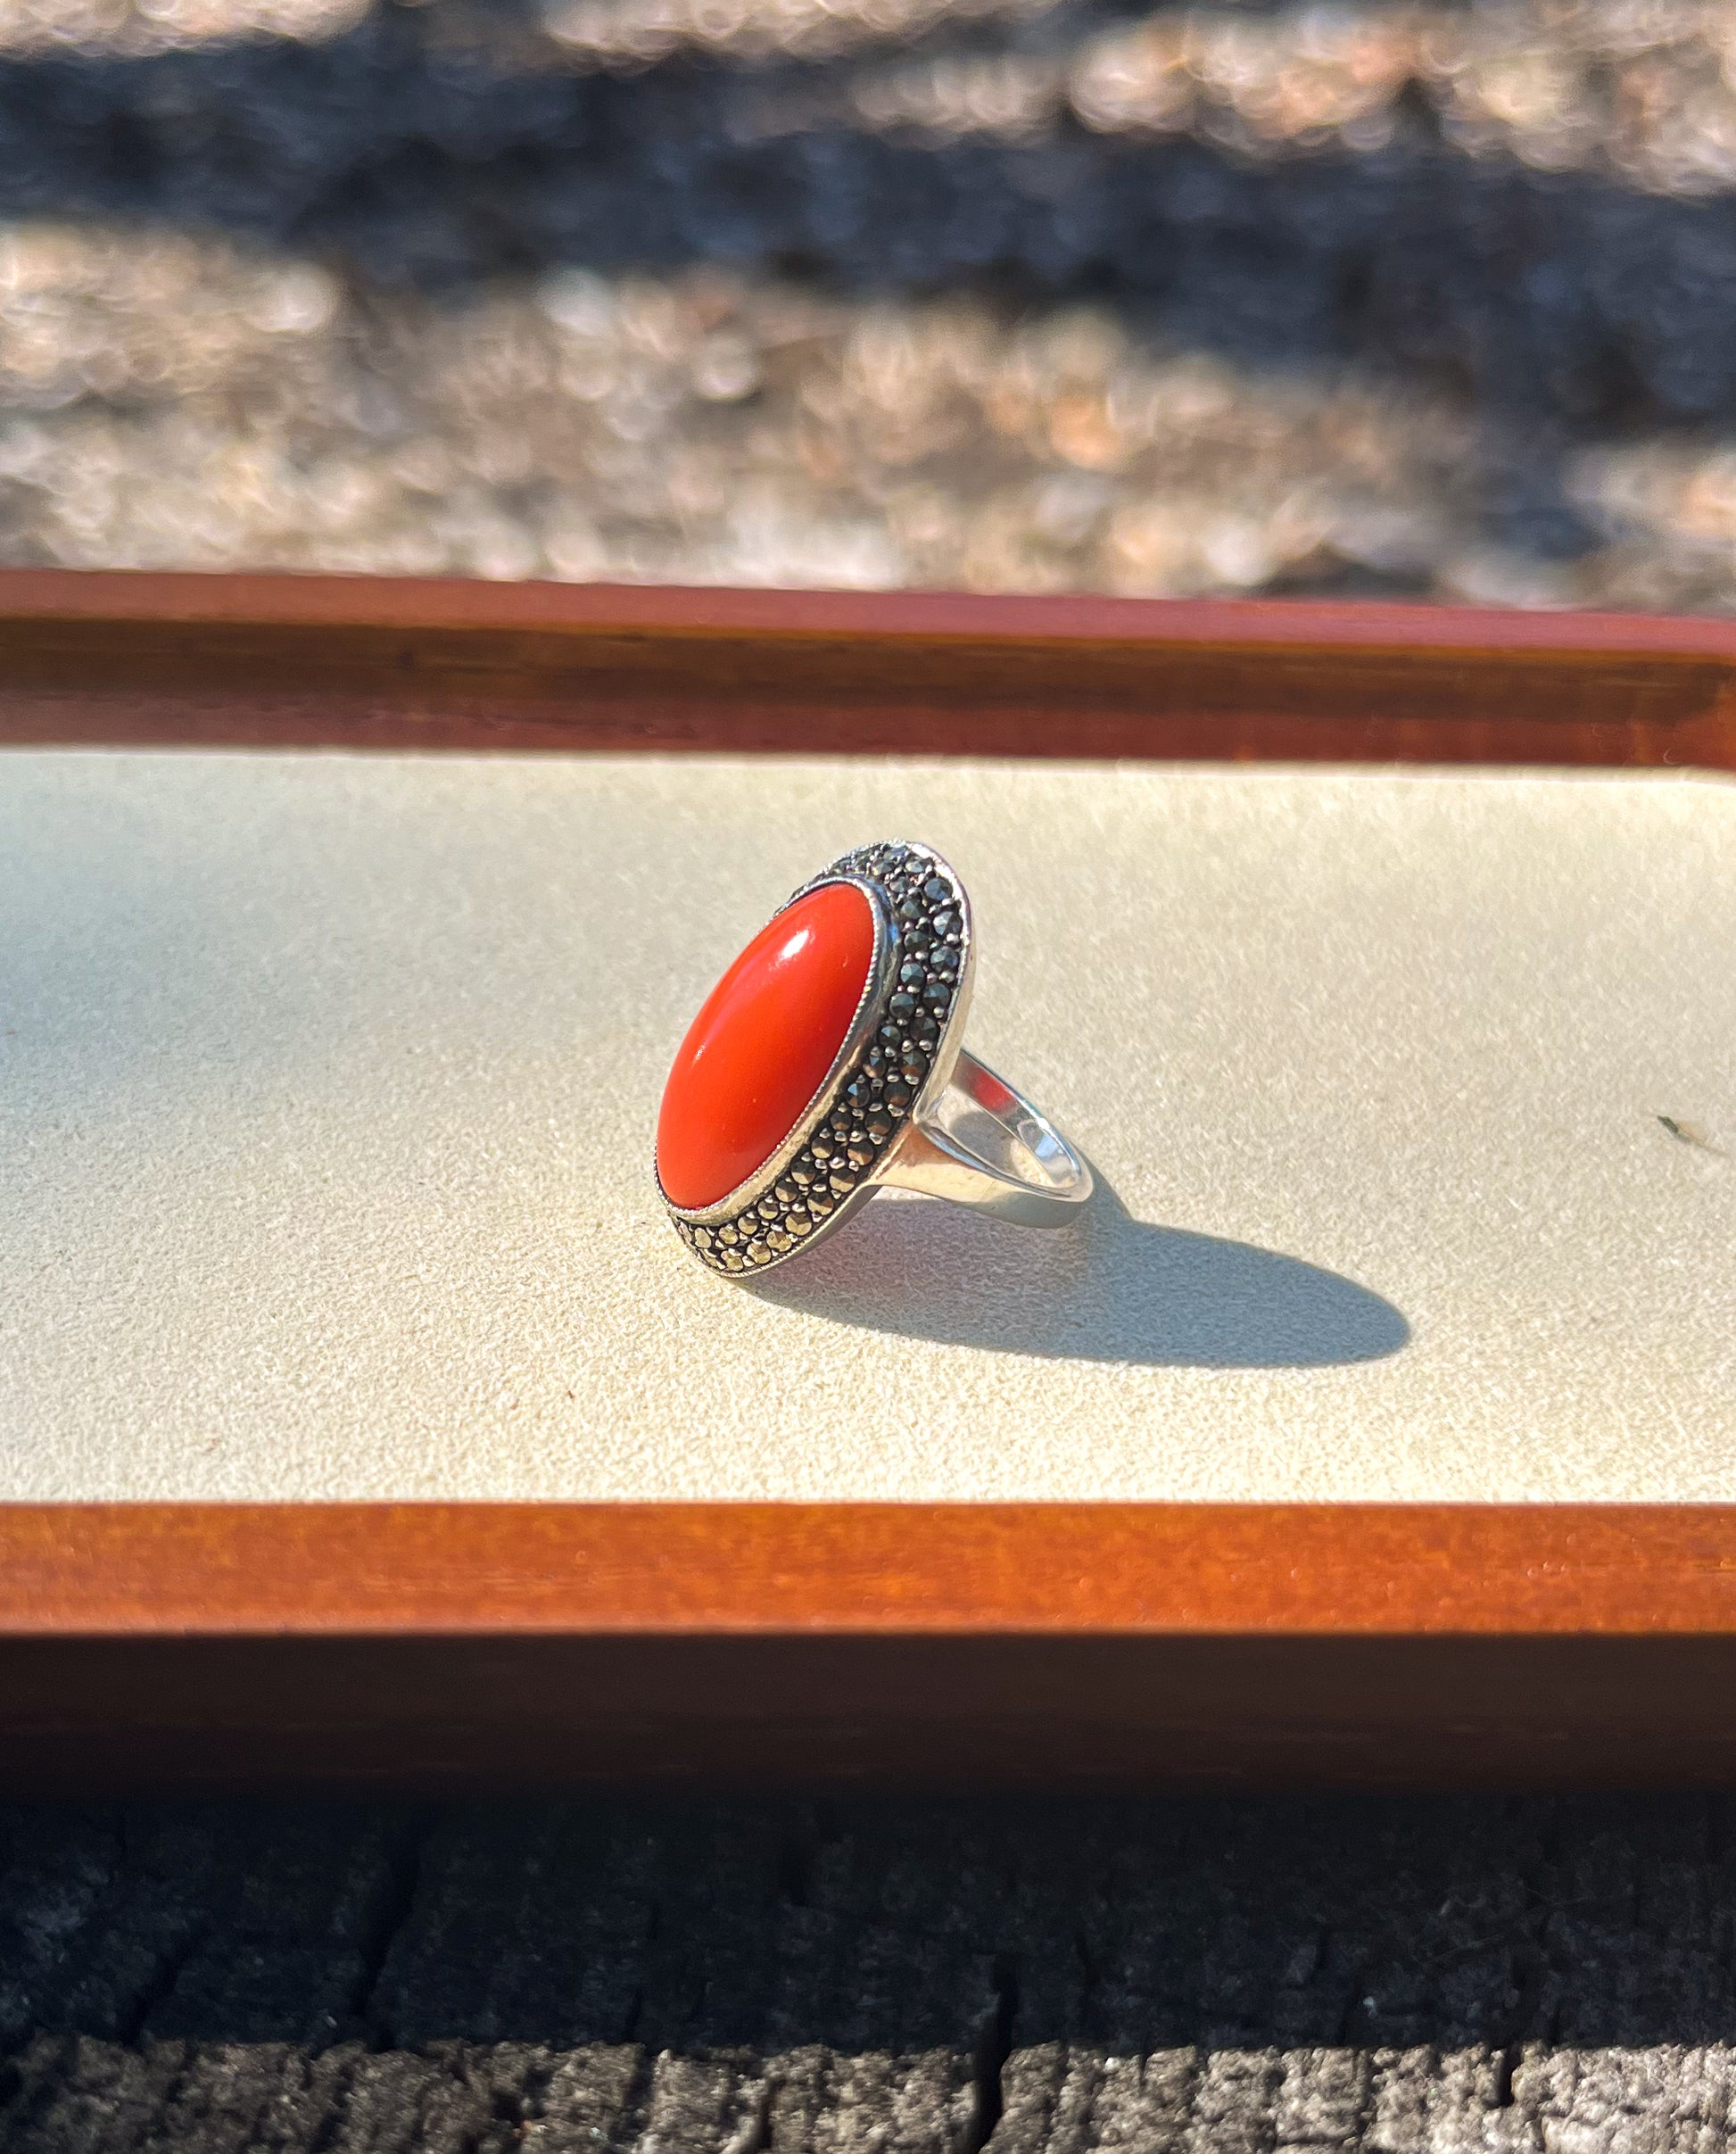 Antique Art Deco Coral Statement Silver Ring w. natural Marcasite crystals (Germany 1930s) US size 6 w. Hardarbeit stamp (sustainable jewelry) anniversary gift, graduation gift, wedding gift, collectible jewelry